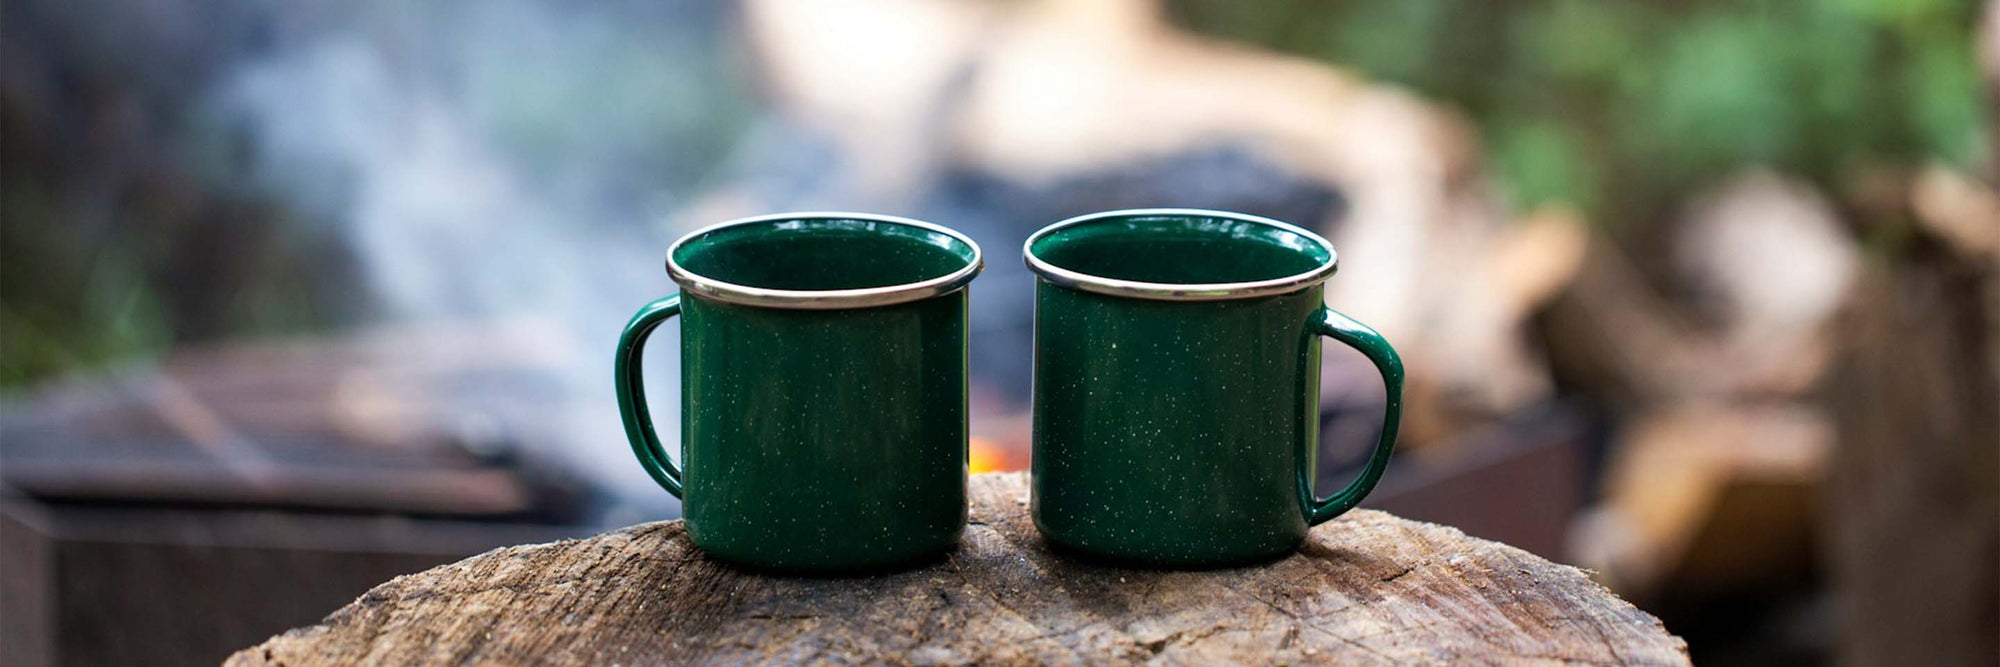 Two green coffee mugs in front of a campfire.